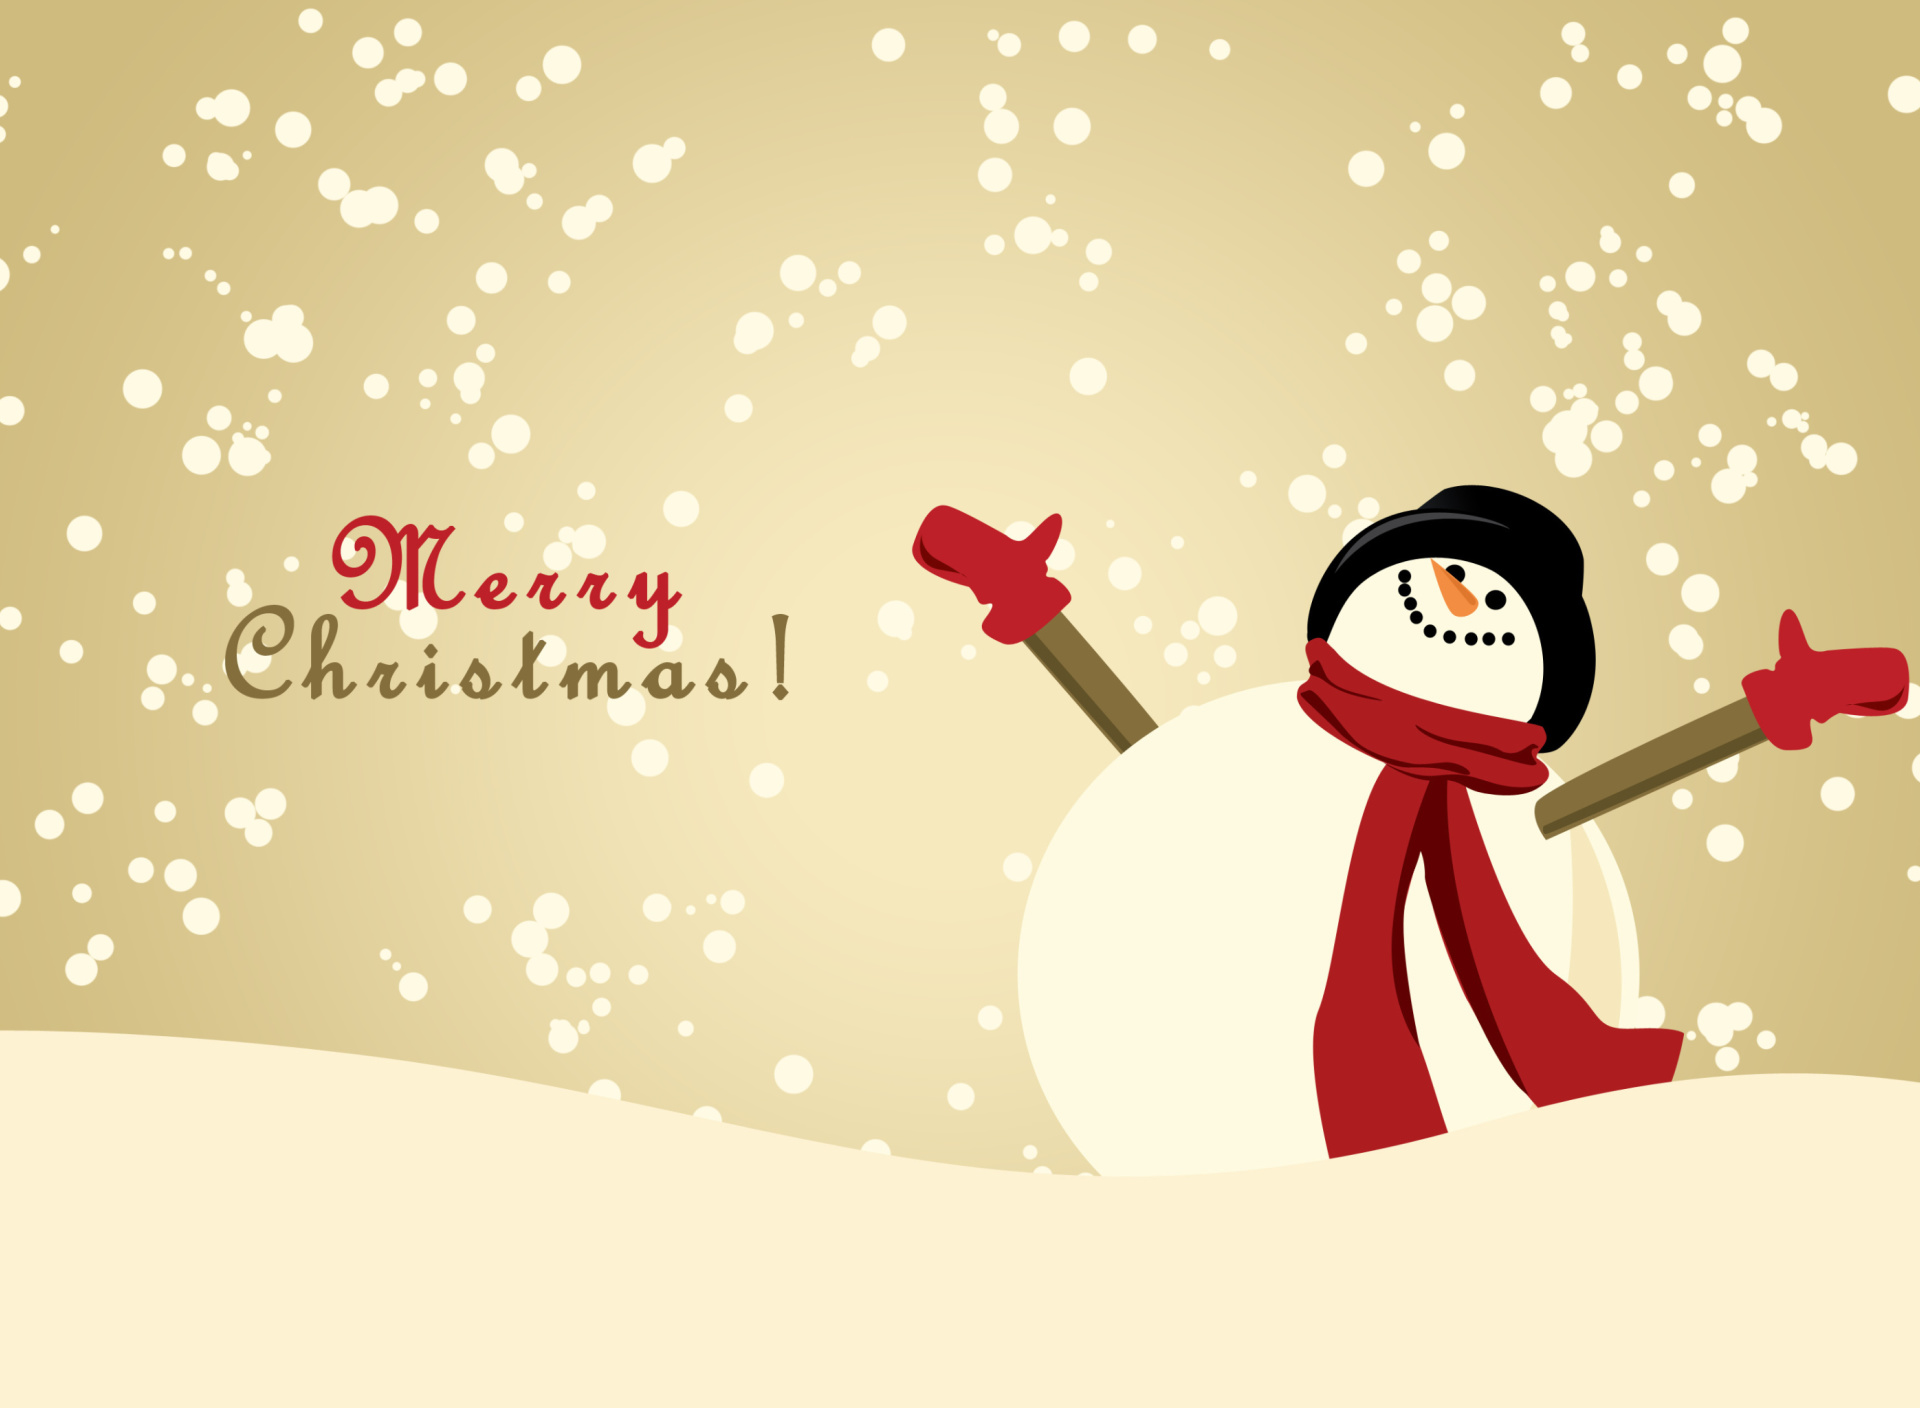 Merry Christmas Wishes from Snowman wallpaper 1920x1408